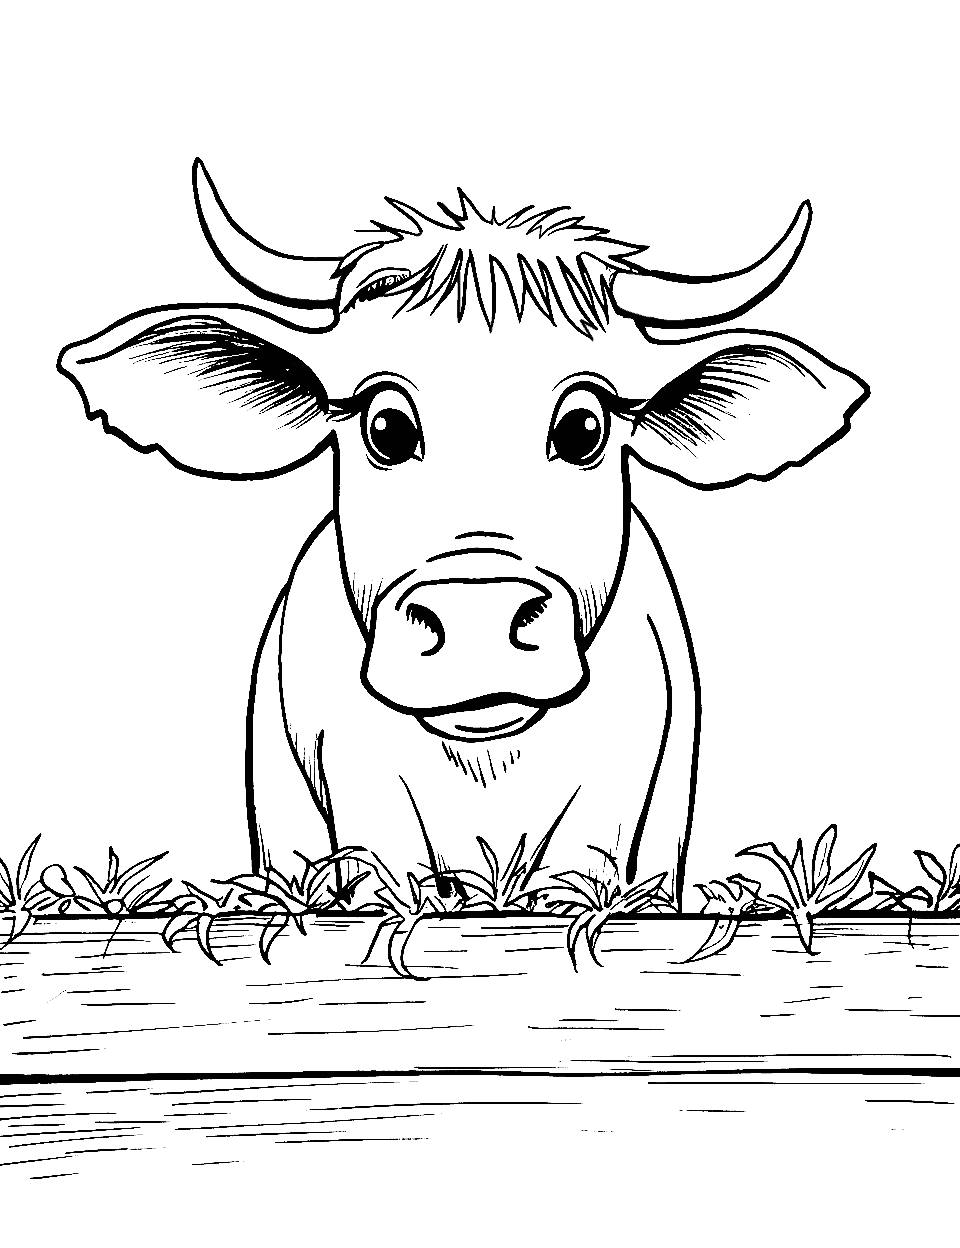 Eating from the Trough Coloring Page - A cow happily munching on hay from a simple feeding trough.